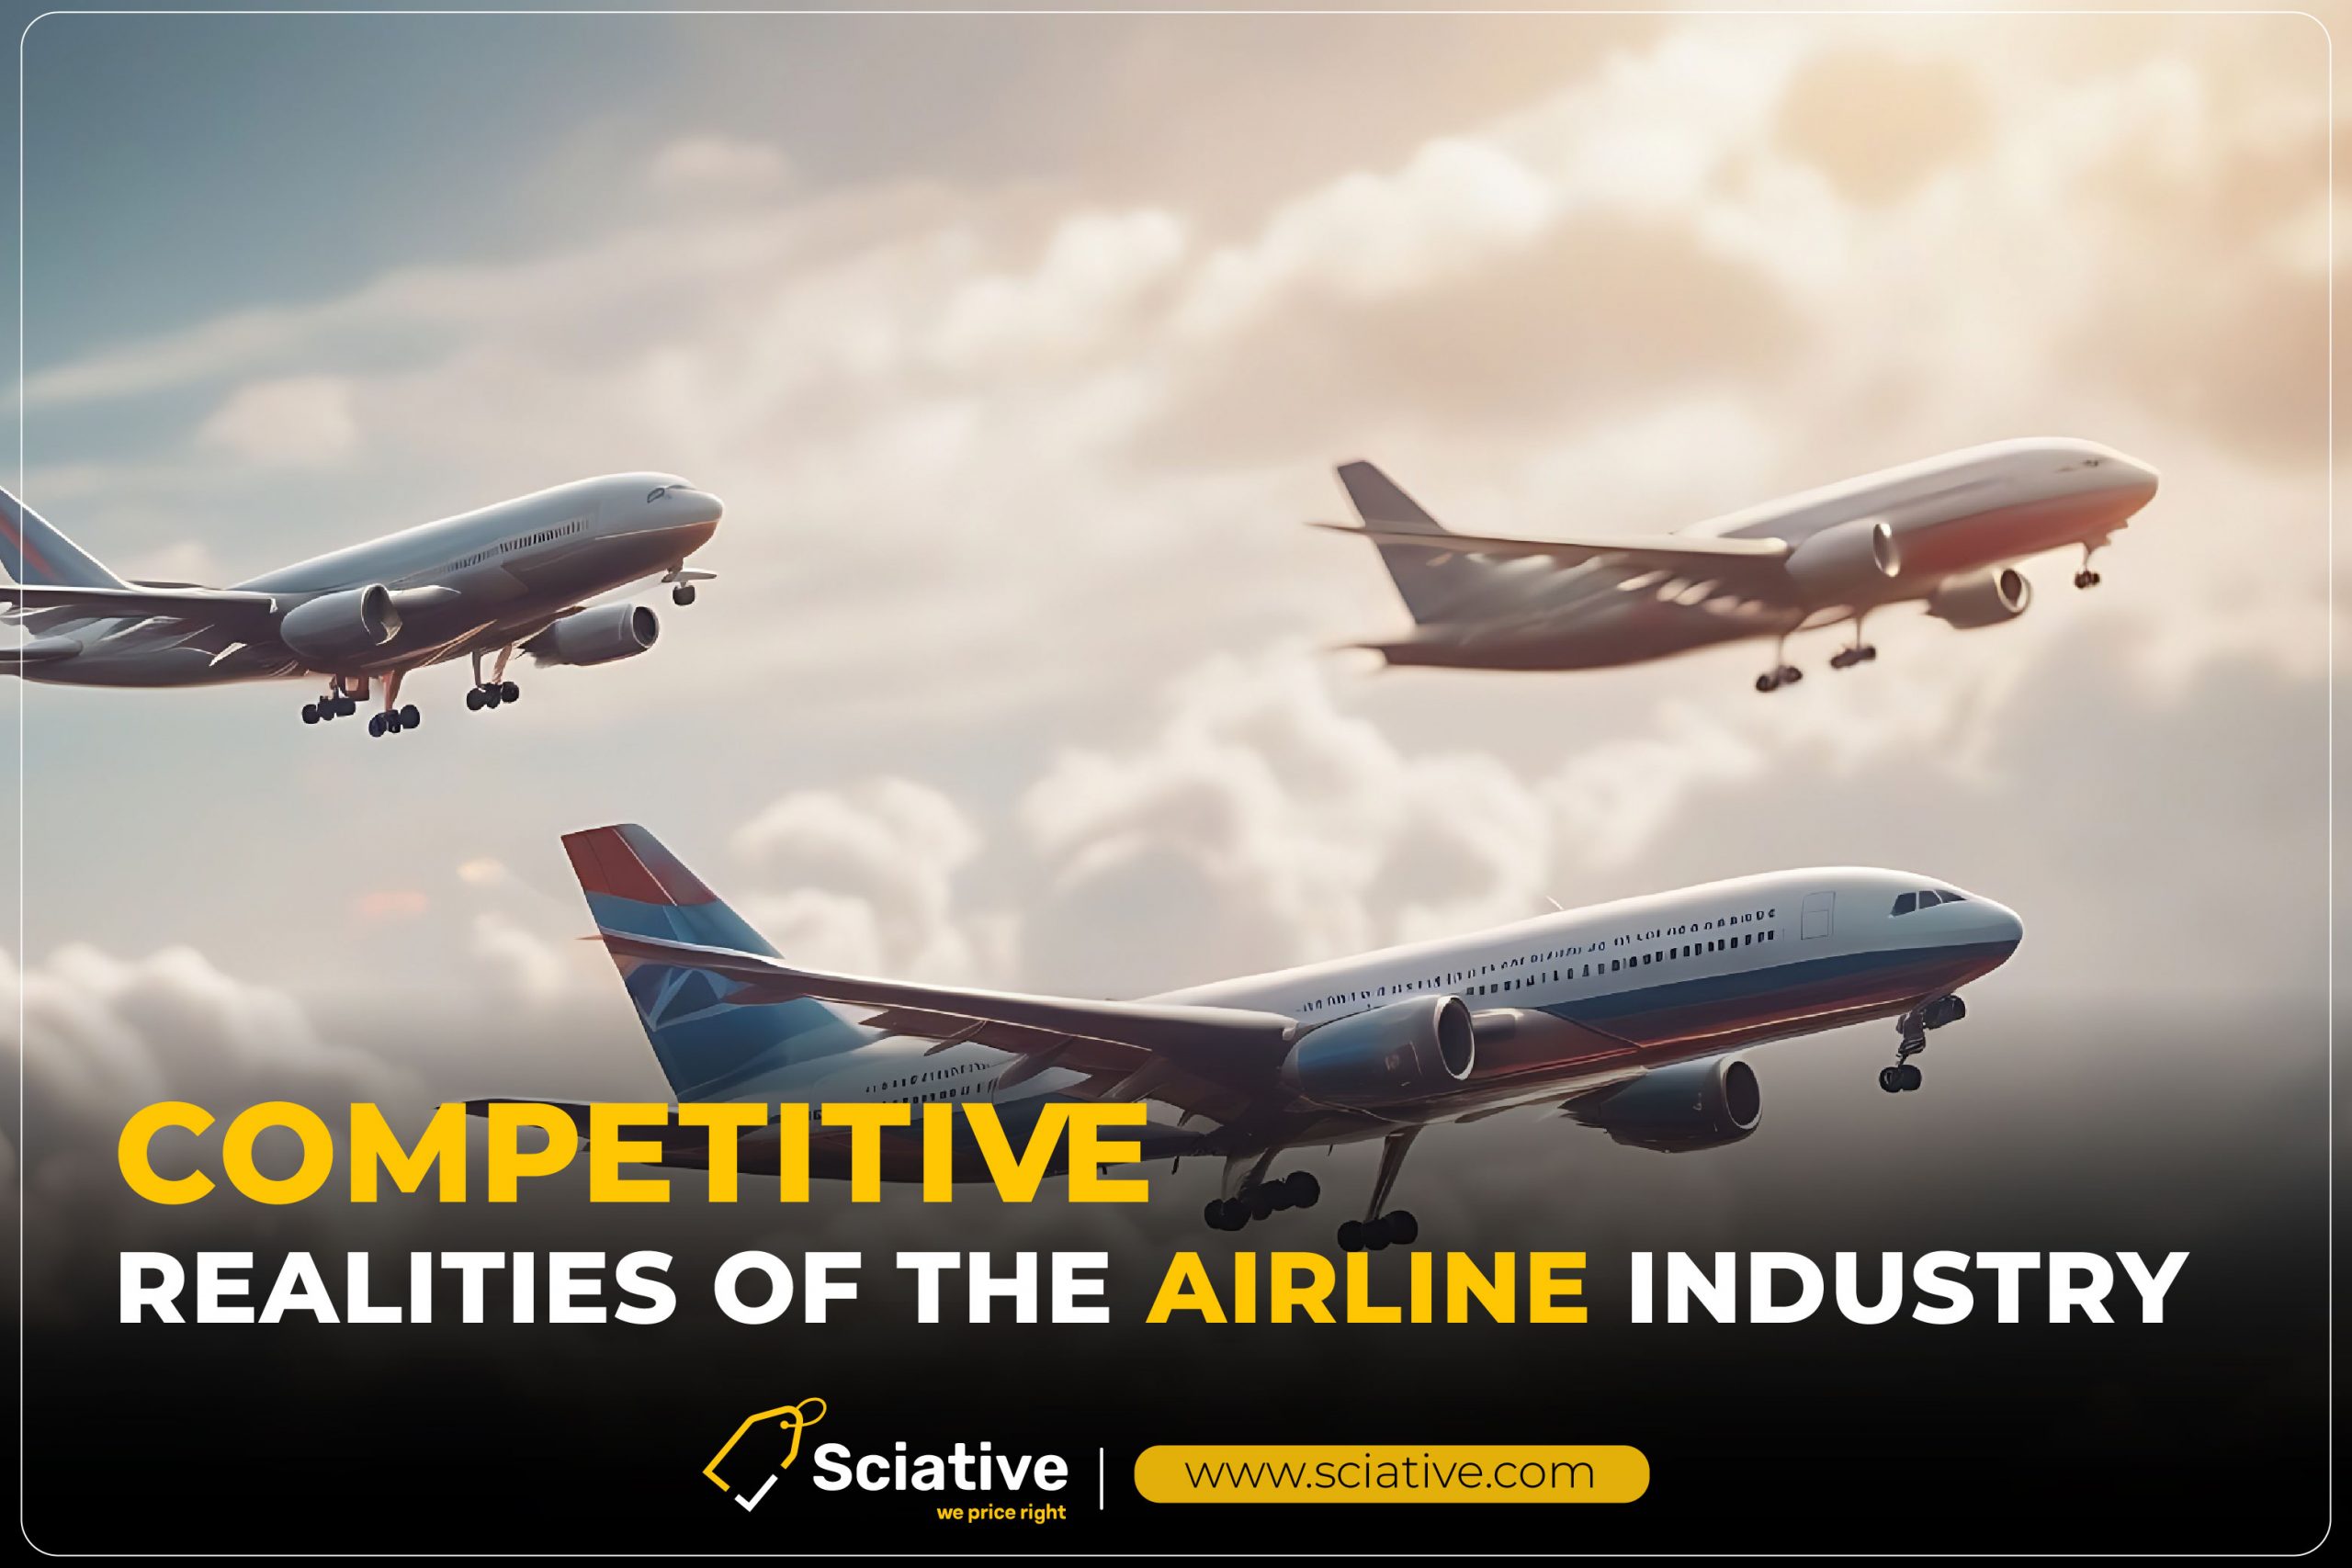 Competitive realities of the airline industry